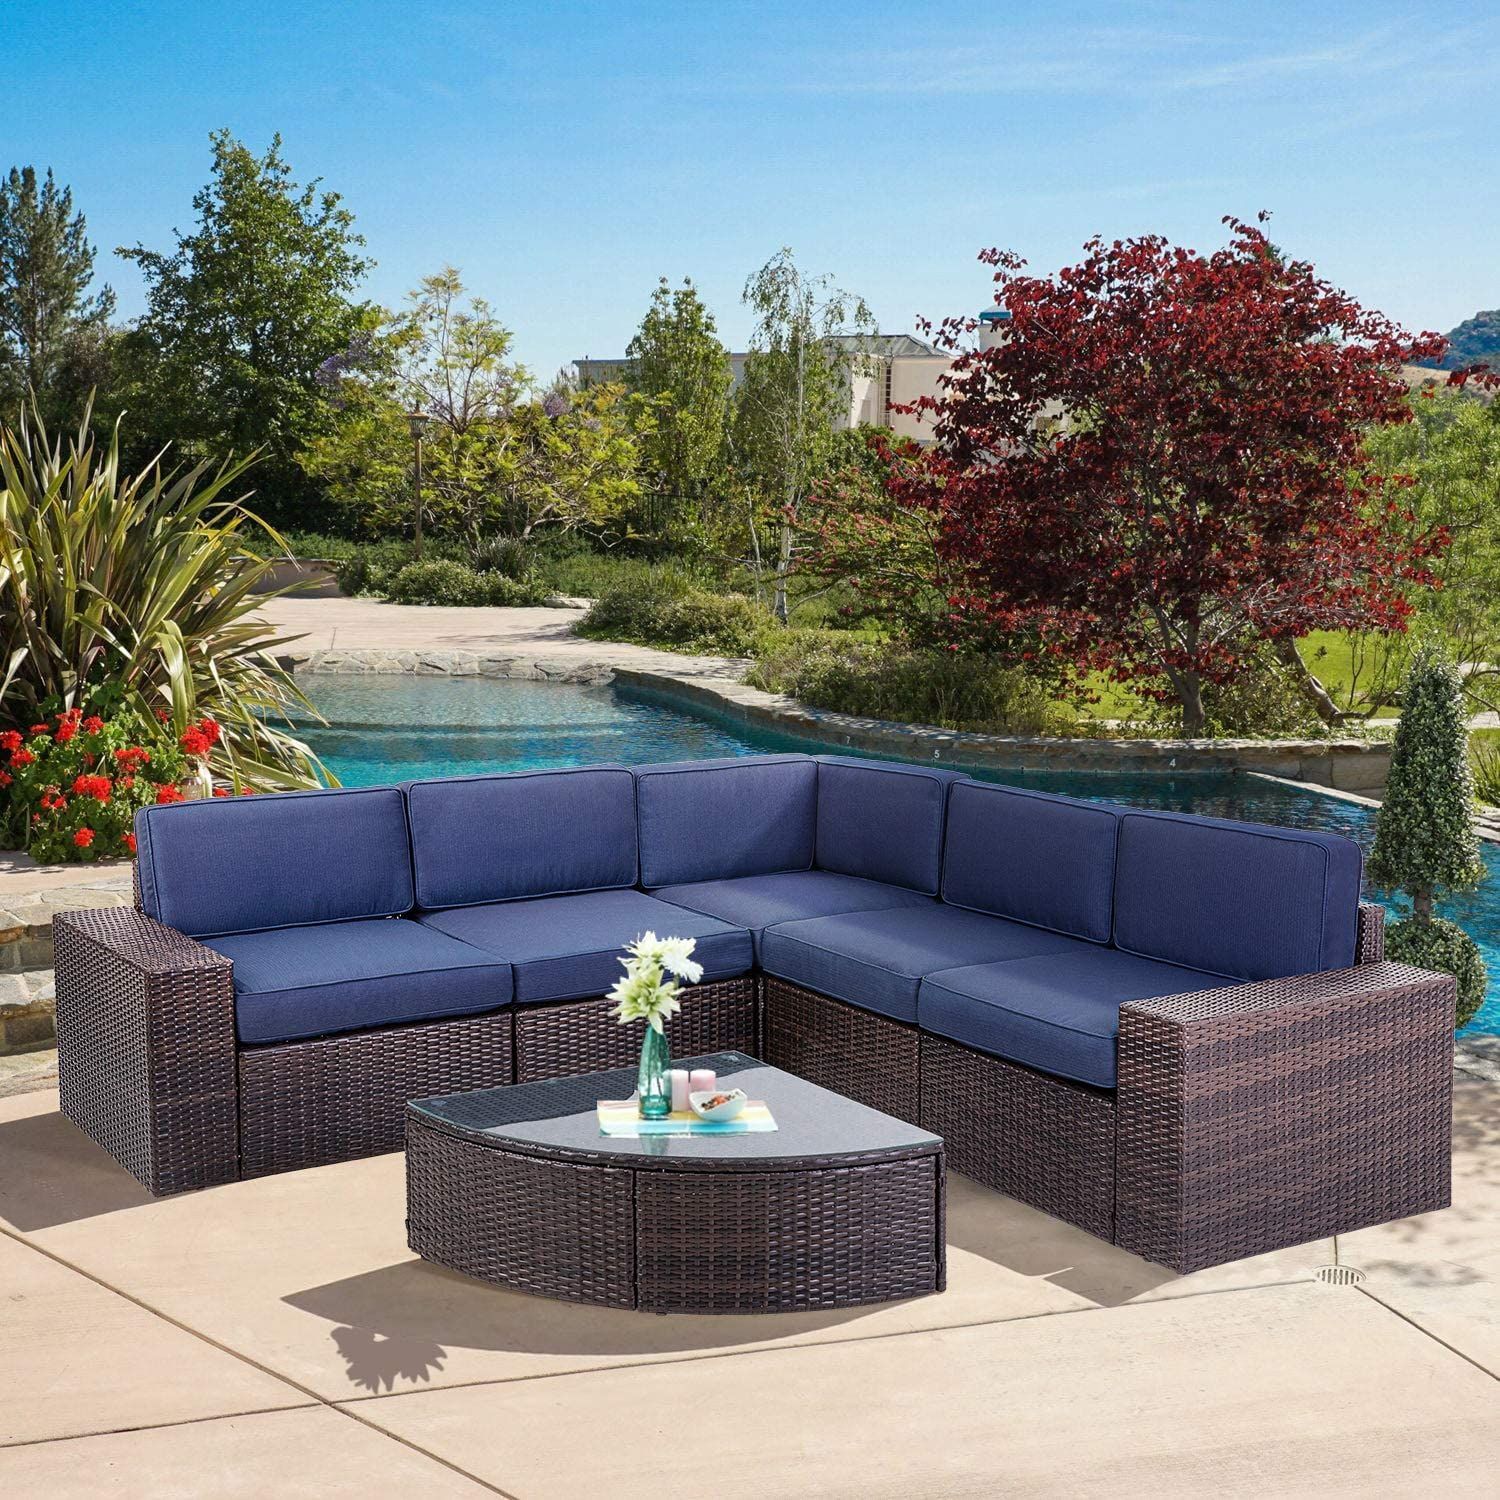 Suncrown Outdoor Furniture 6 Piece Patio Sofa And Wedge Table Set, All With Navy Outdoor Seating Sets (View 6 of 15)